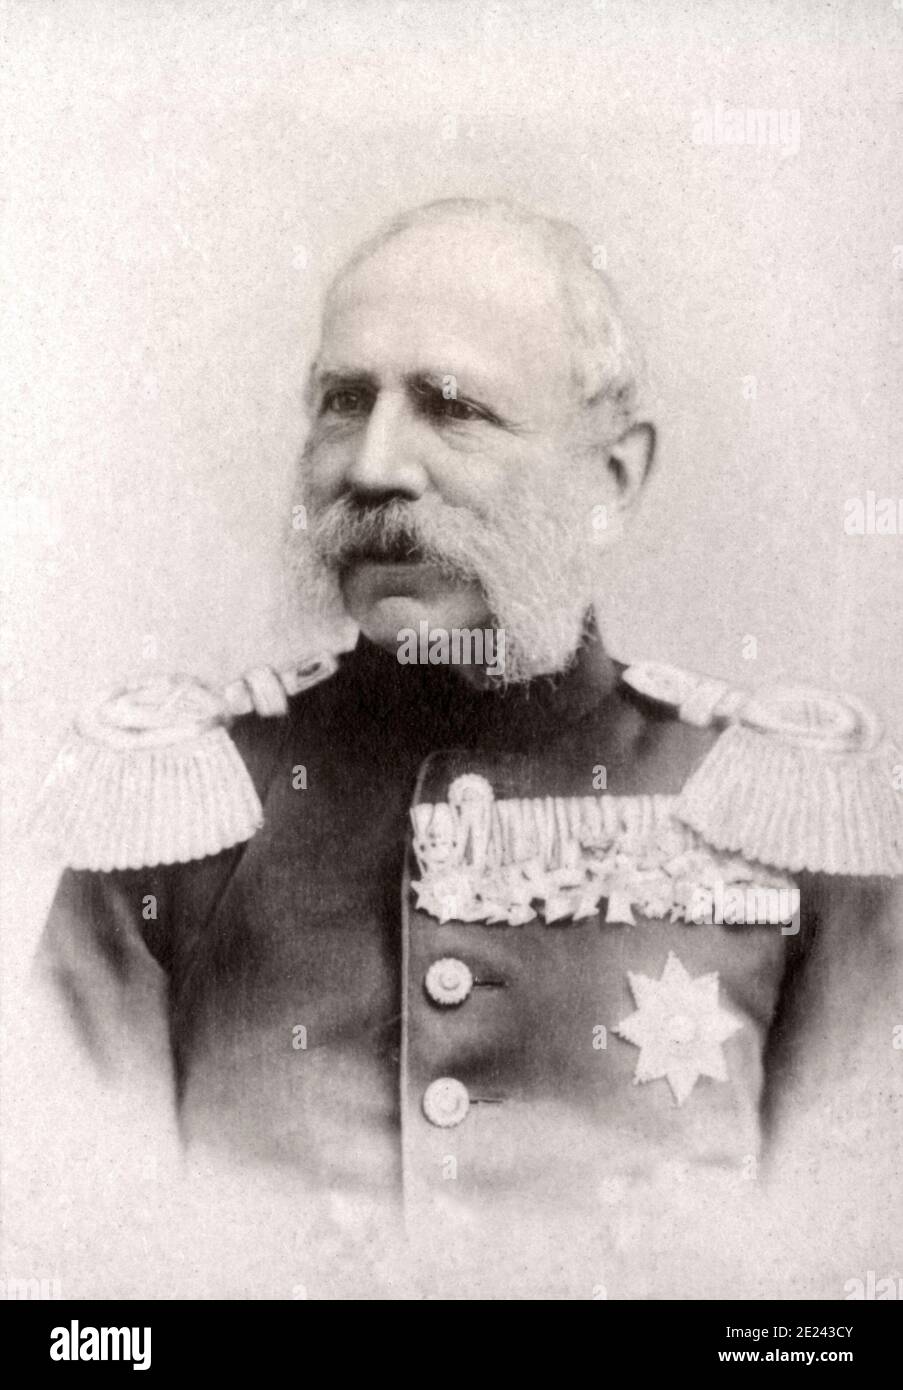 Albert (1828 – 1902) was the King of Saxony and a member of the House of Wettin. He had a successful military career leading Saxon troops which partic Stock Photo